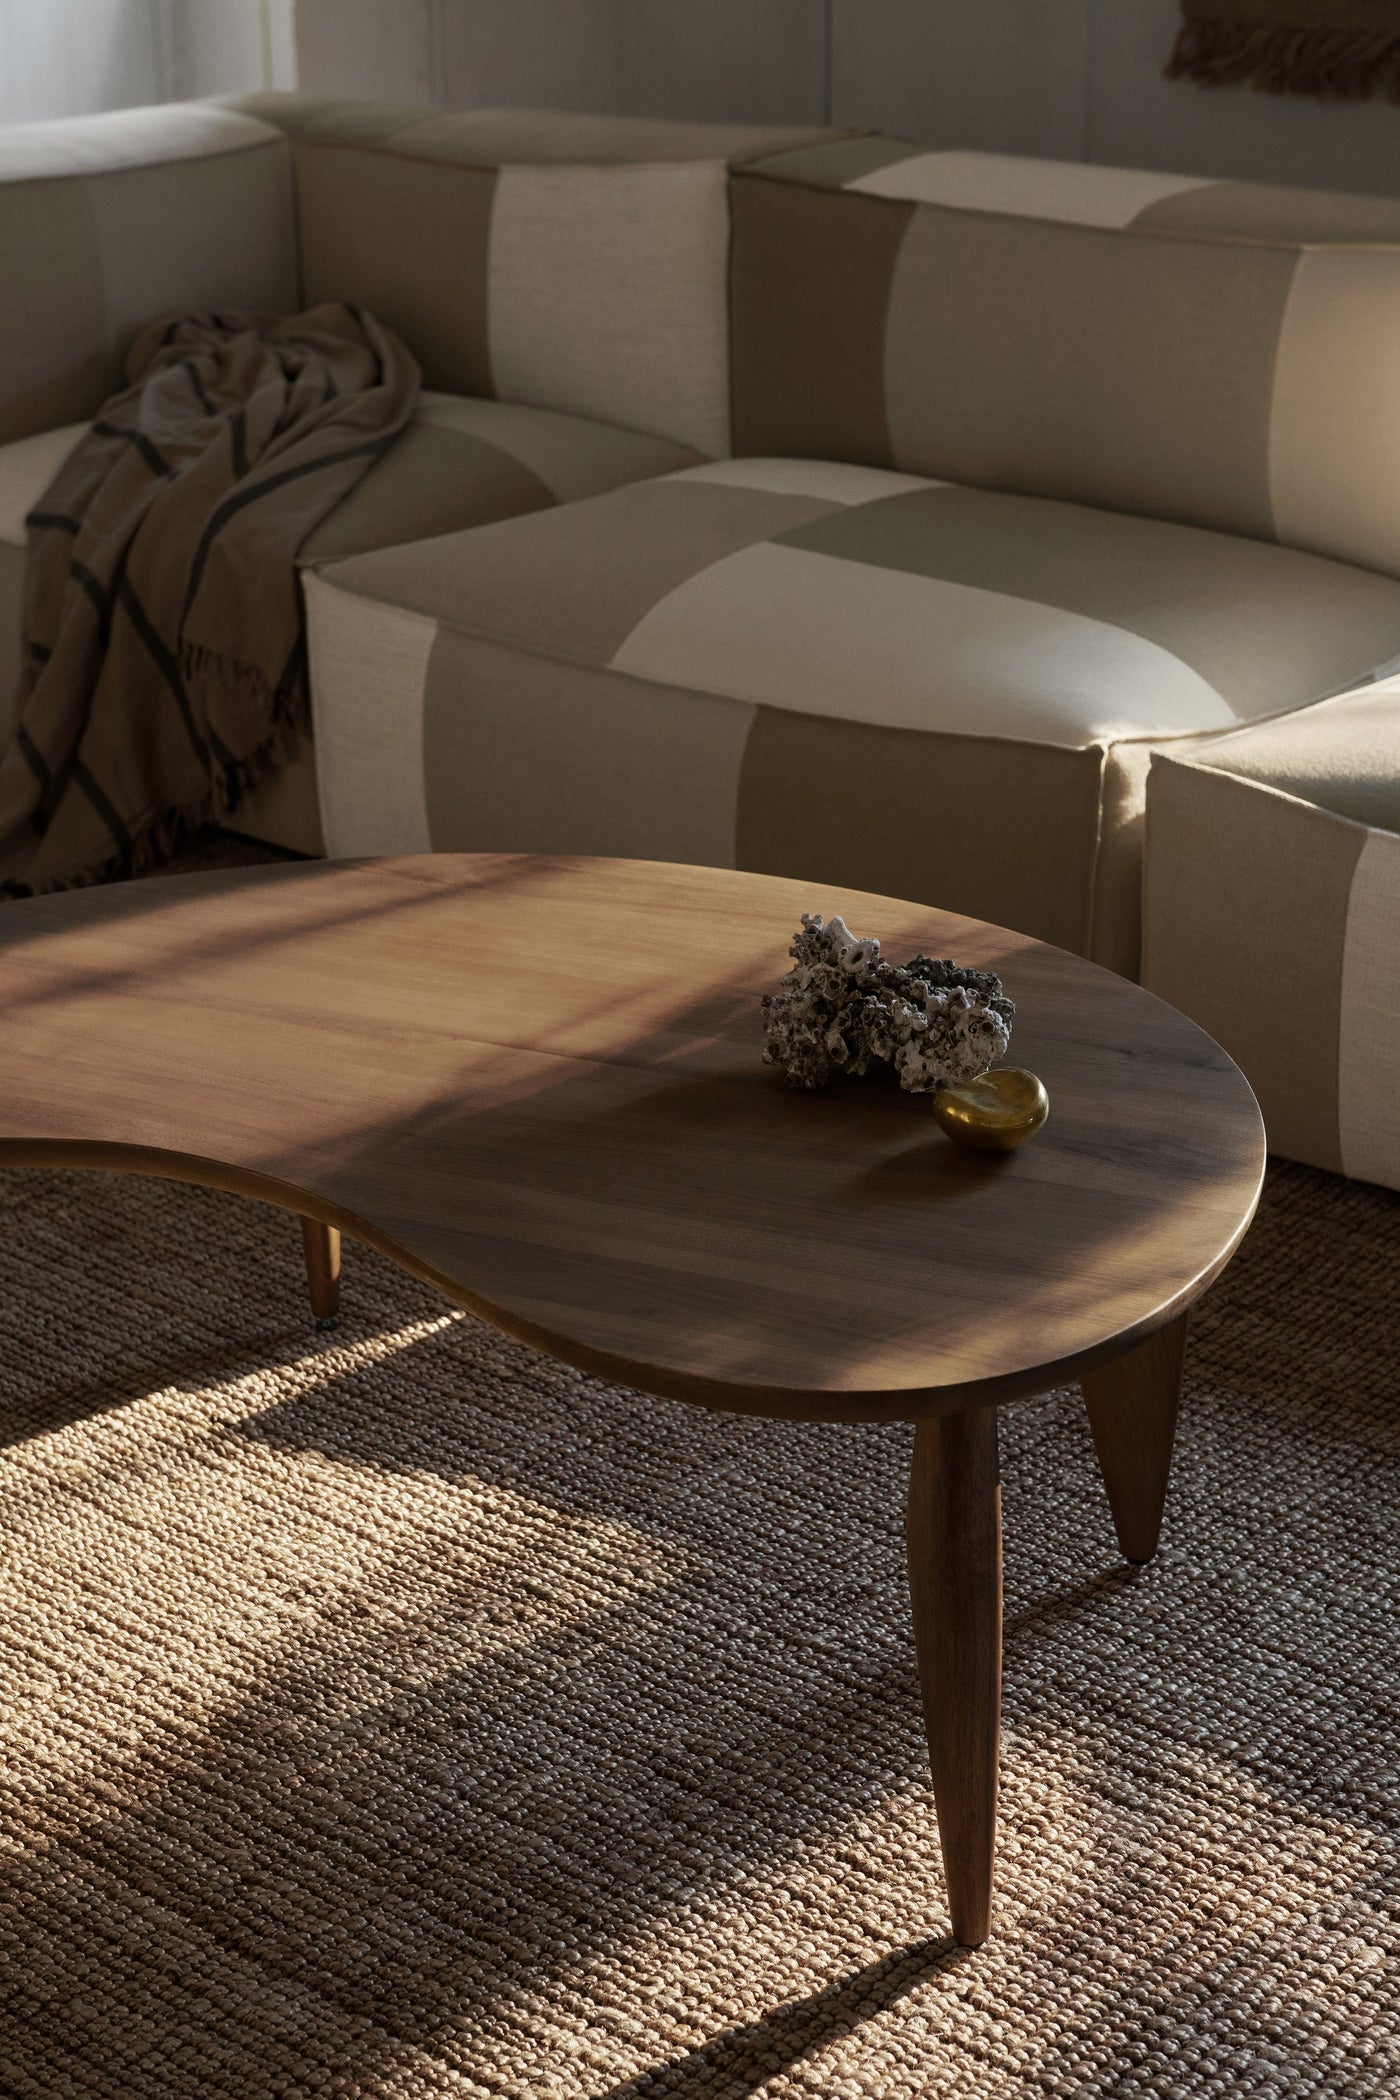 ferm LIVING Feve Coffee Table with Catena sofa. Free UK delivery at someday designs